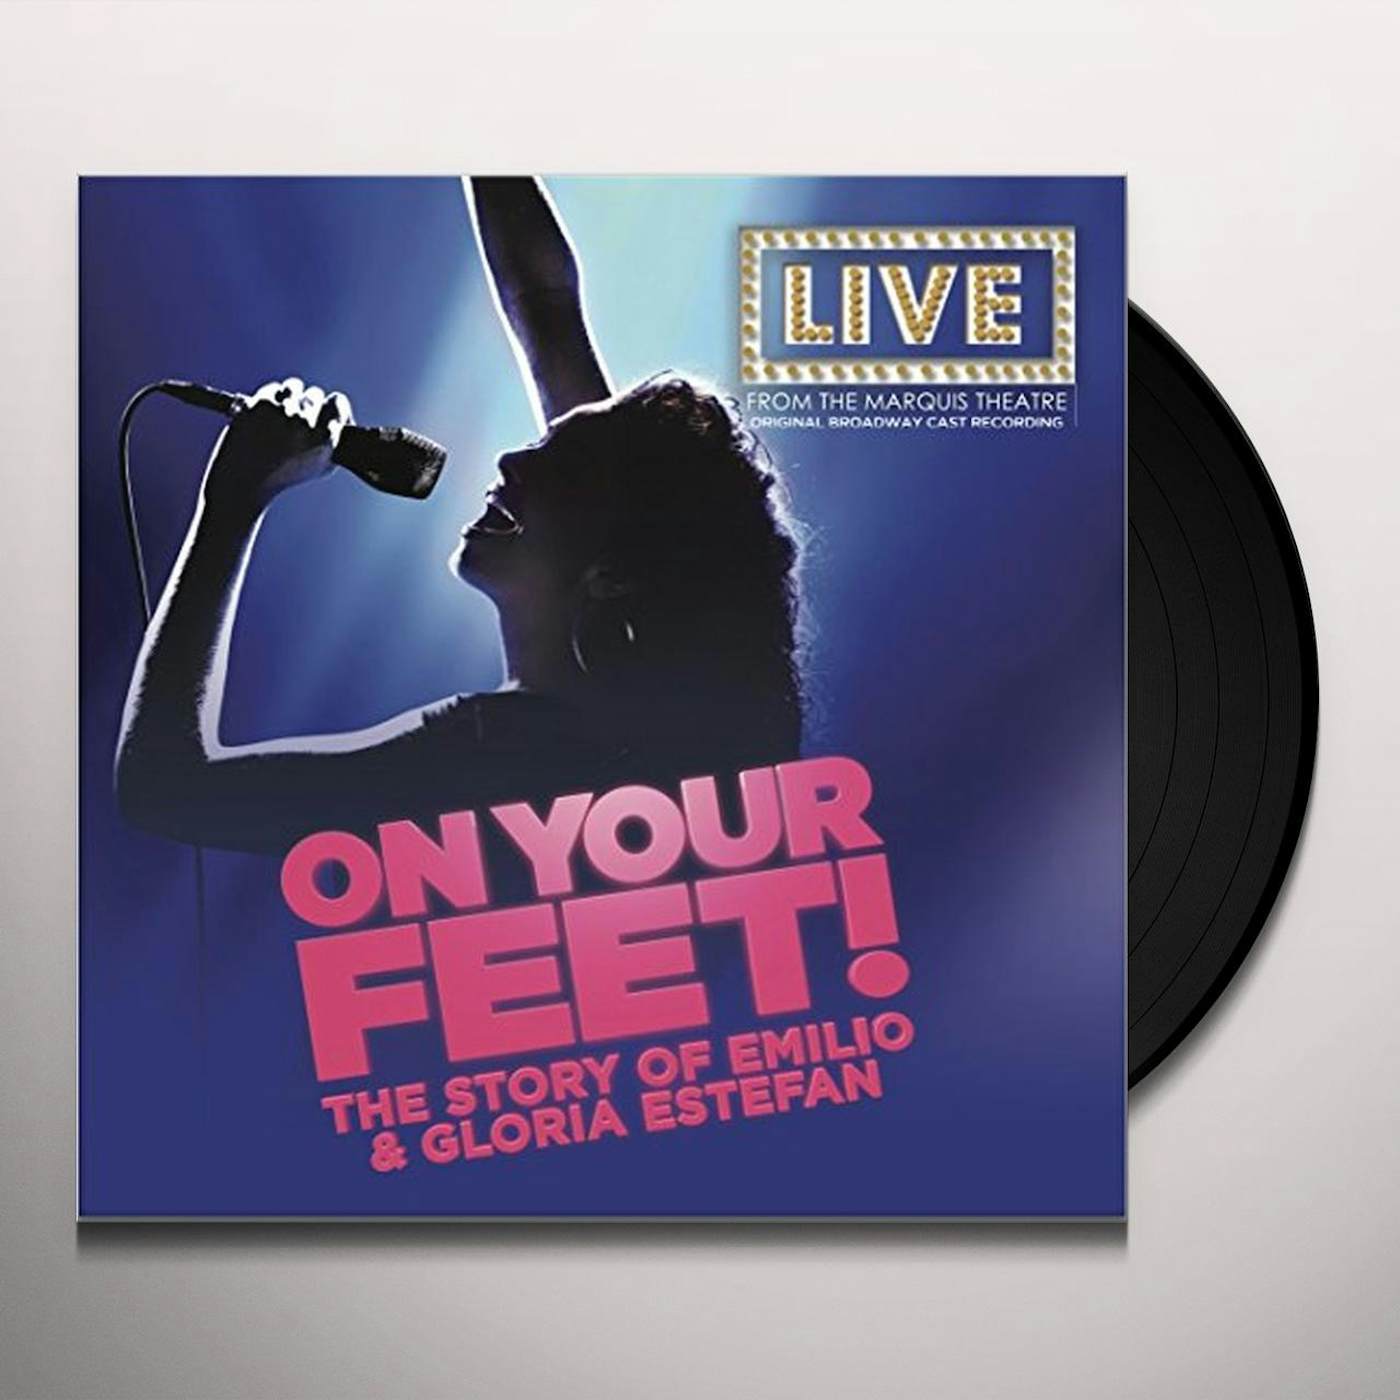 ON YOUR FEET: THE STORY OF EMILIO & GLORIA ON YOU FEET: THE STORY OF EMILIO & GLORIA / O.B.C. Vinyl Record